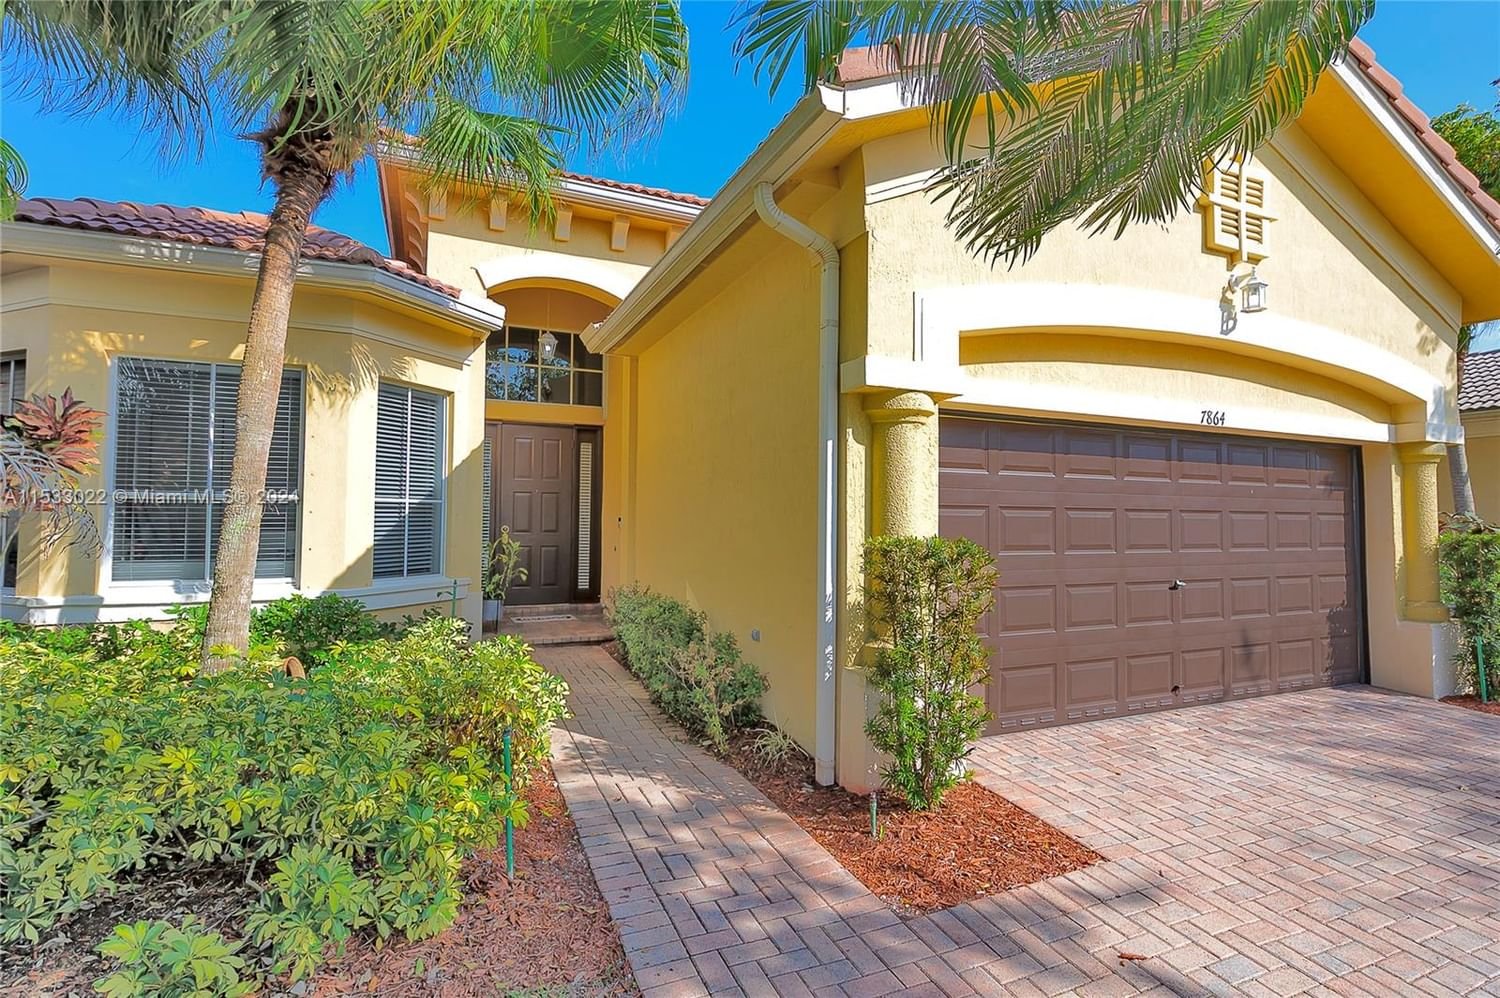 Real estate property located at 7864 123rd Ave, Broward County, HERON BAY CENTRAL, Parkland, FL